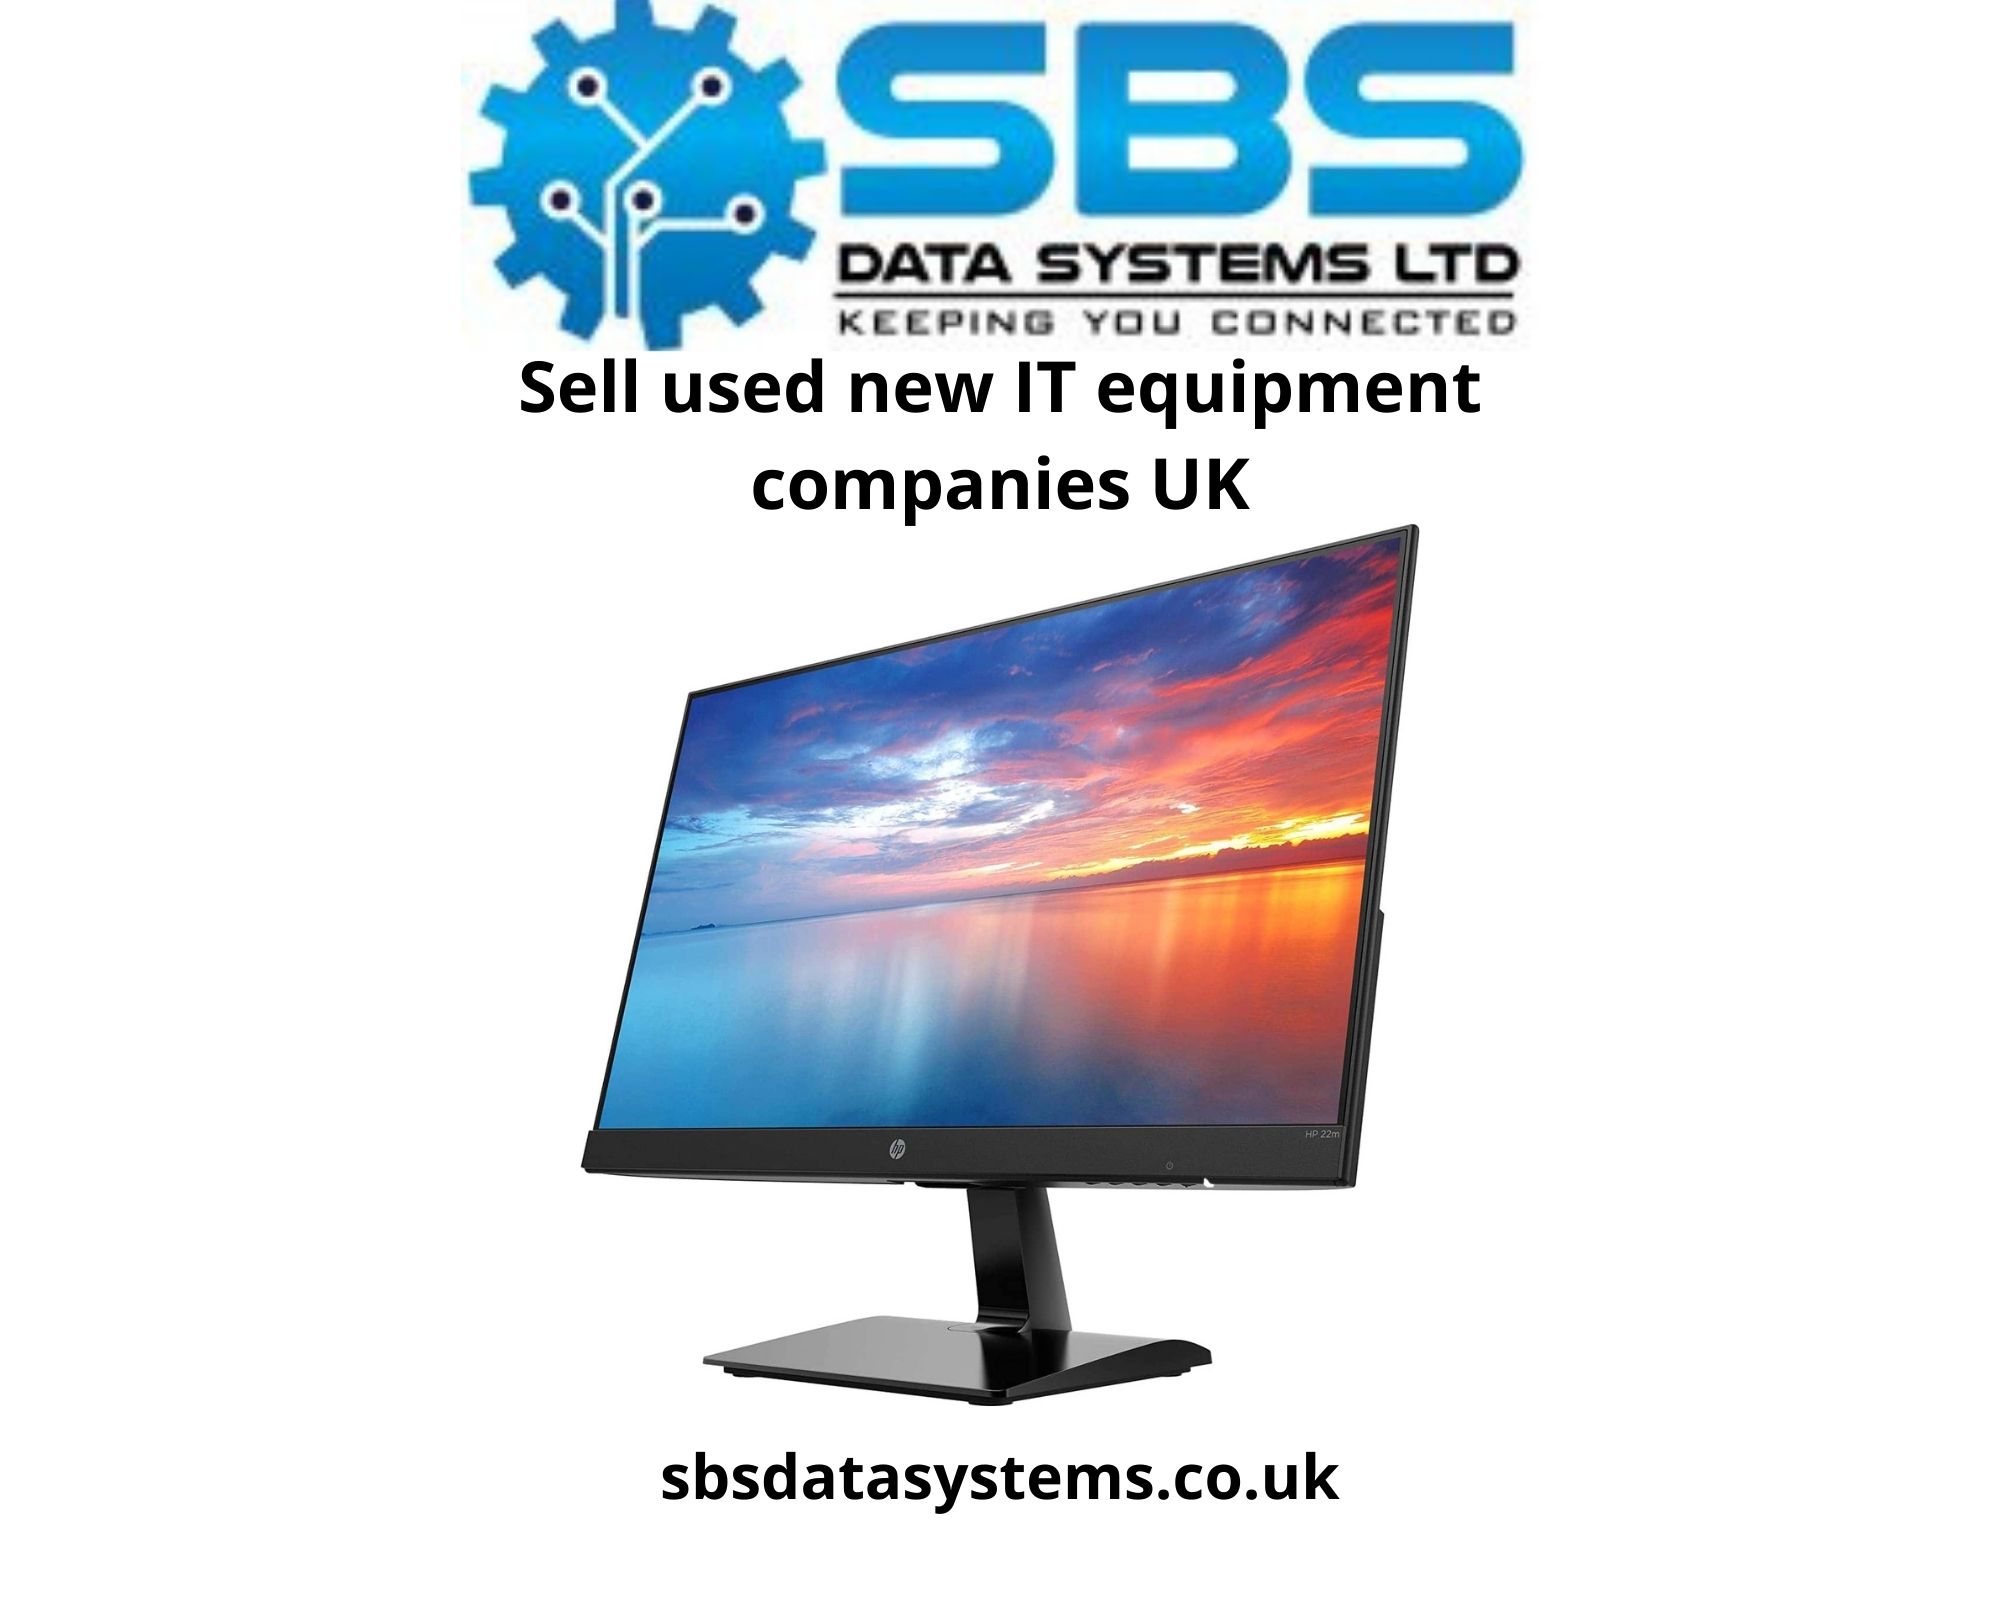 Sell used new IT equipment companies UK.jpg  by Sbsdatasystems